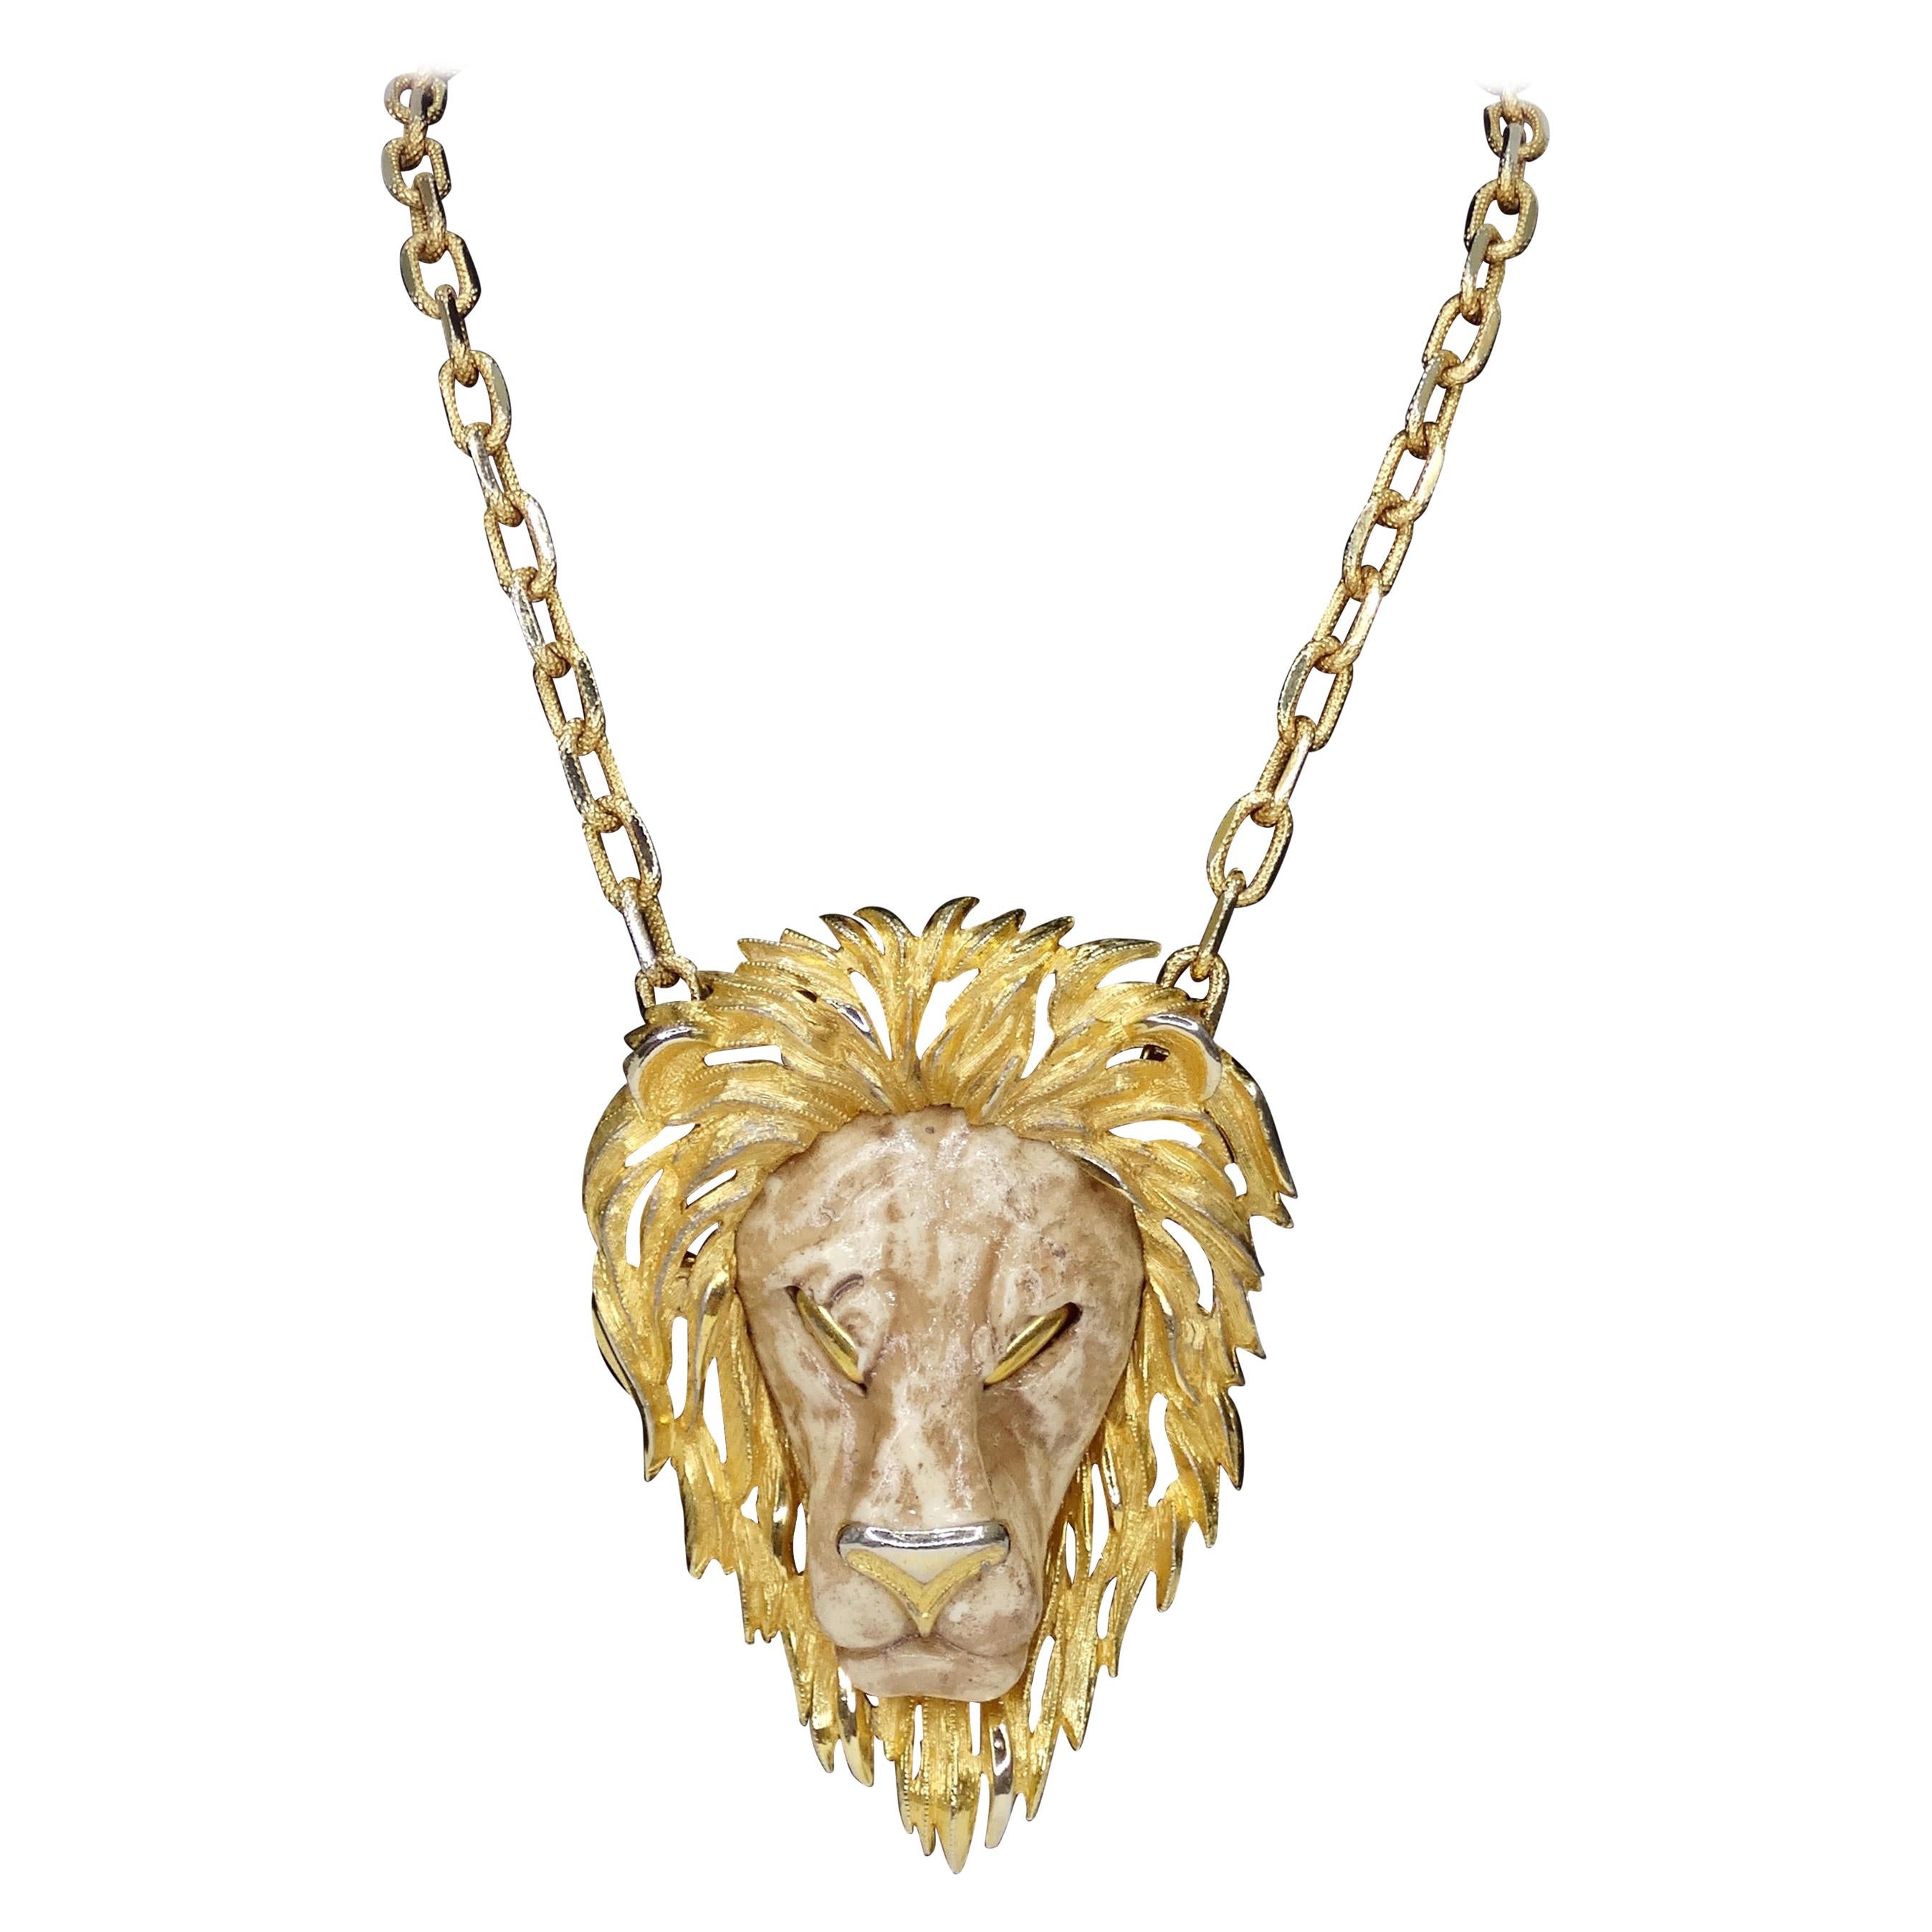 Real 925 Silver / 14k Gold Plated Lion King Of Jungle Medallion